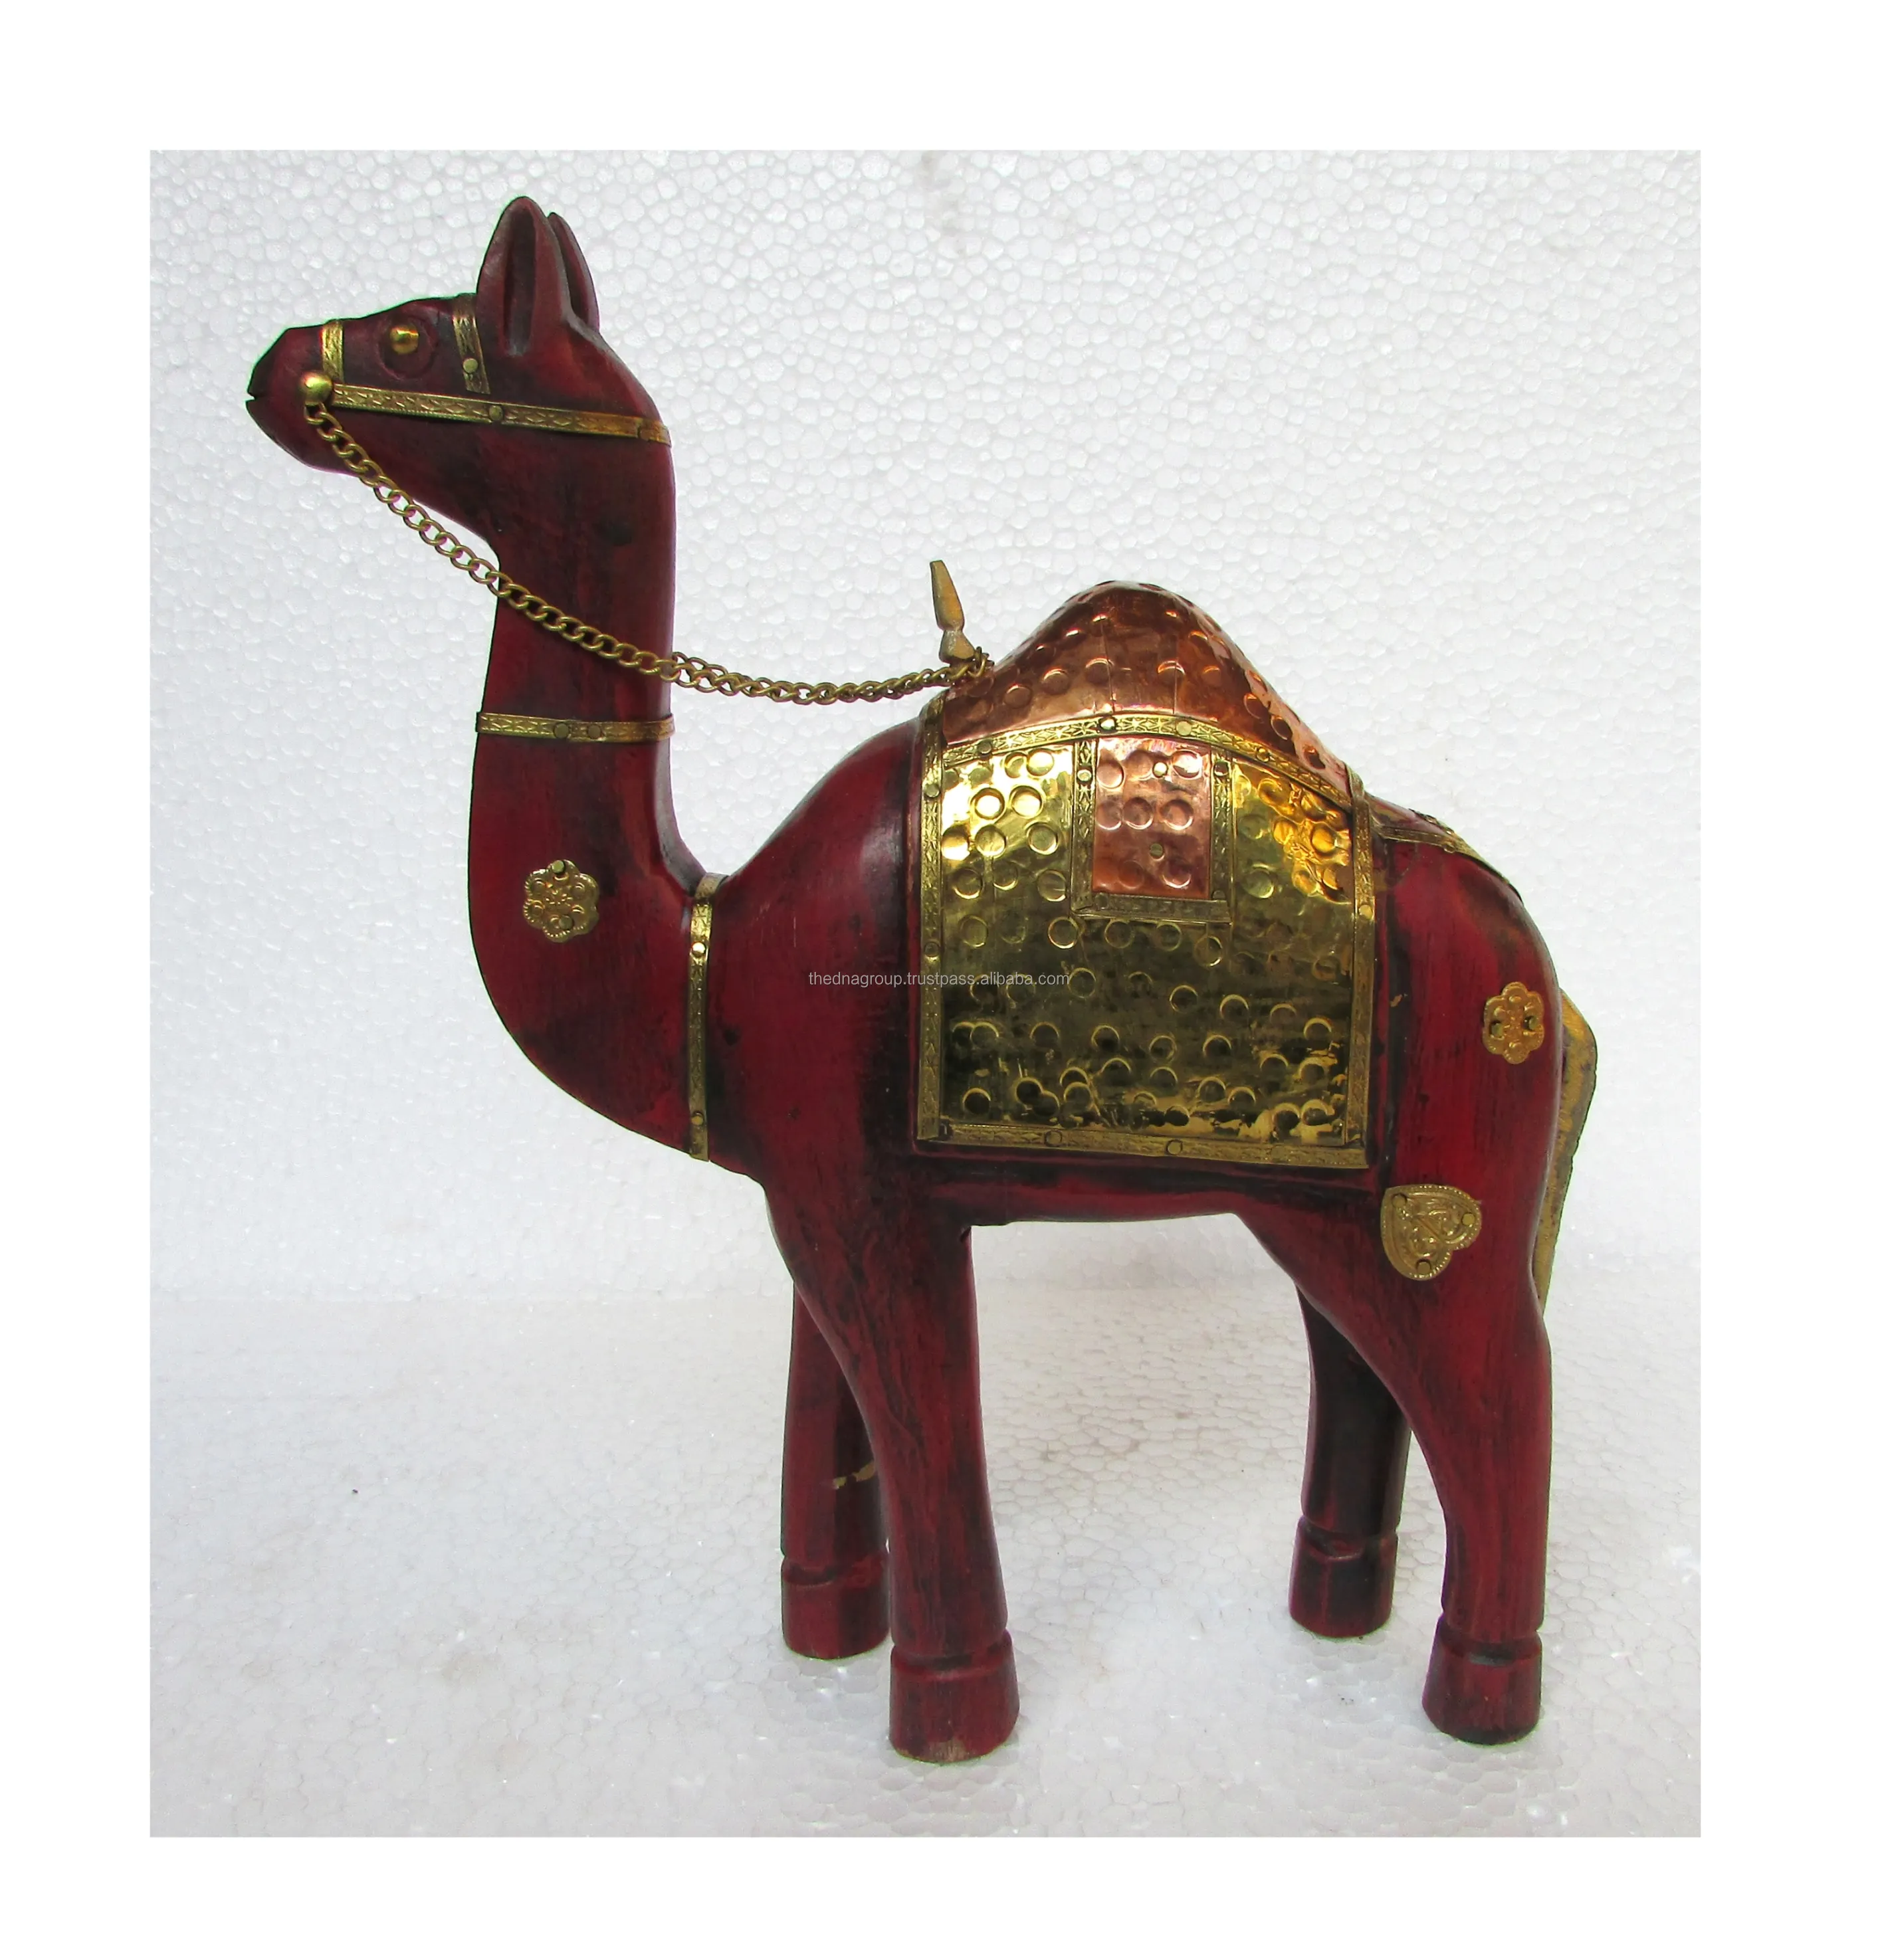 Wooden Decorative with brass work Camel, Home Table Top Decor Wooden Figurine Camel